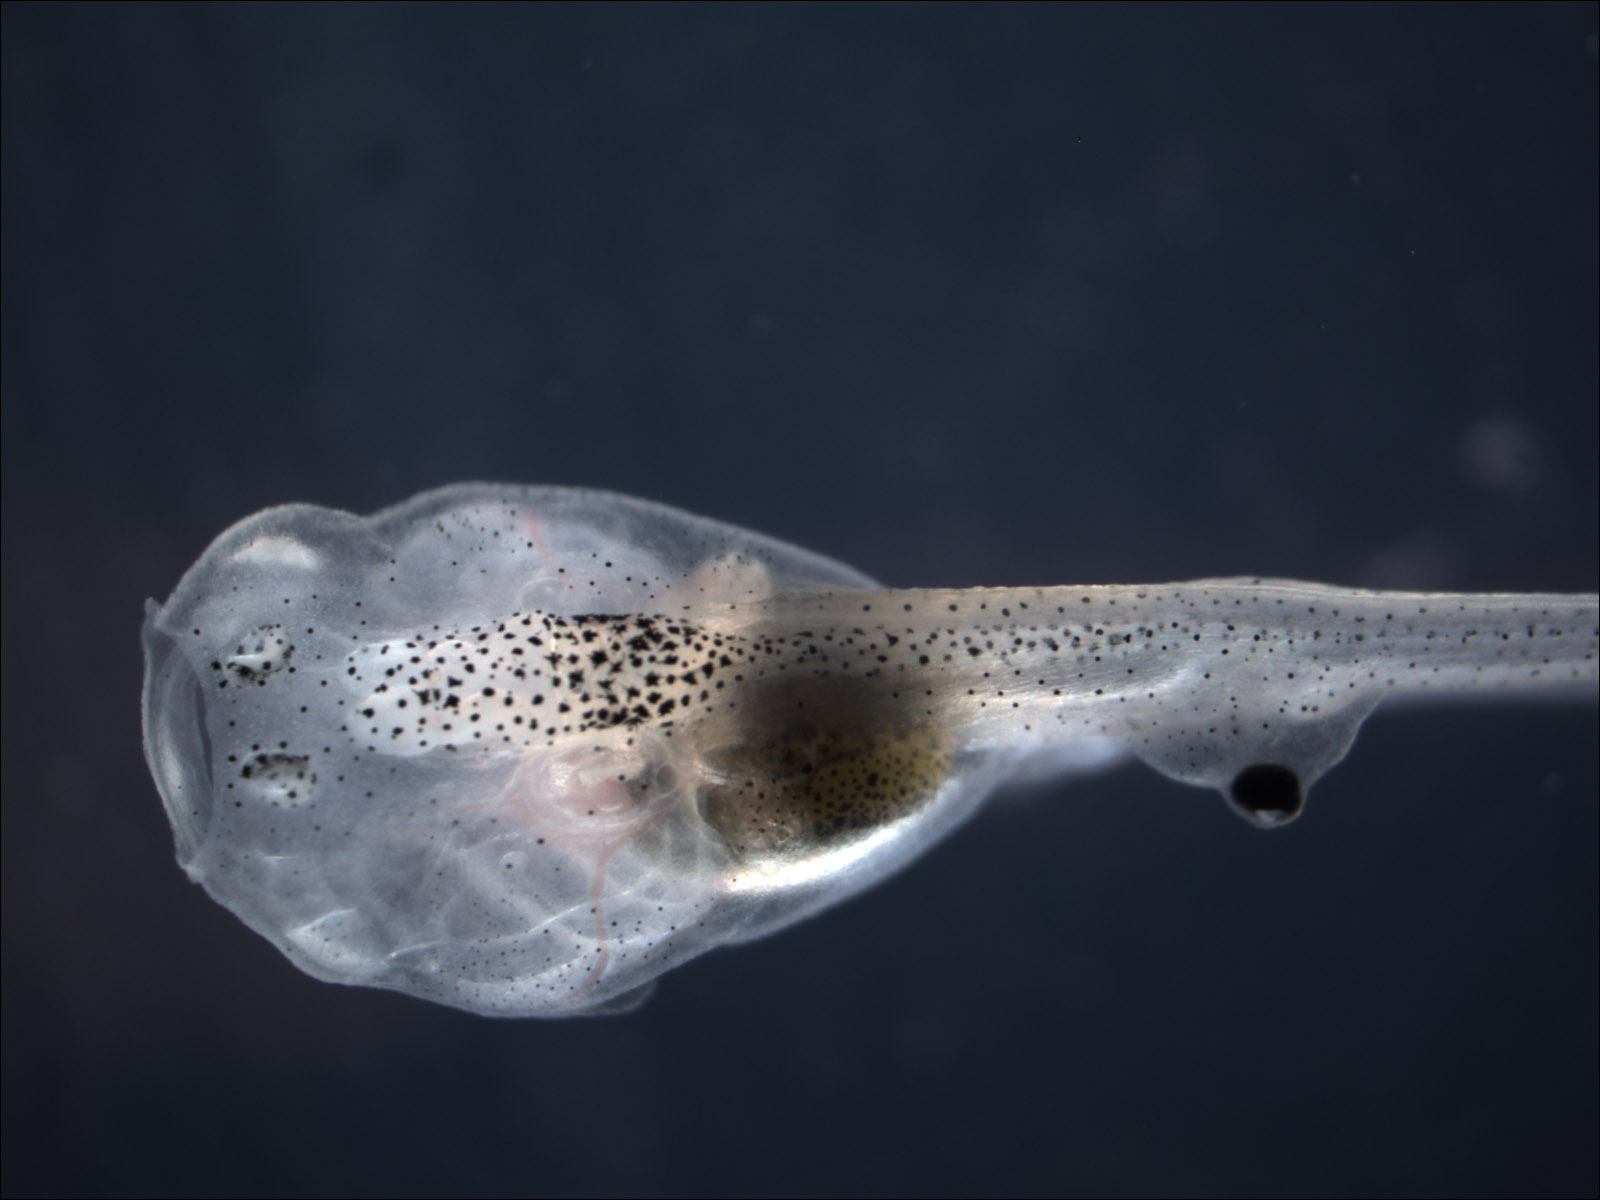 Ectopic eyes function without connection to brain: Experiments with  tadpoles show ectopic eyes that 'see'